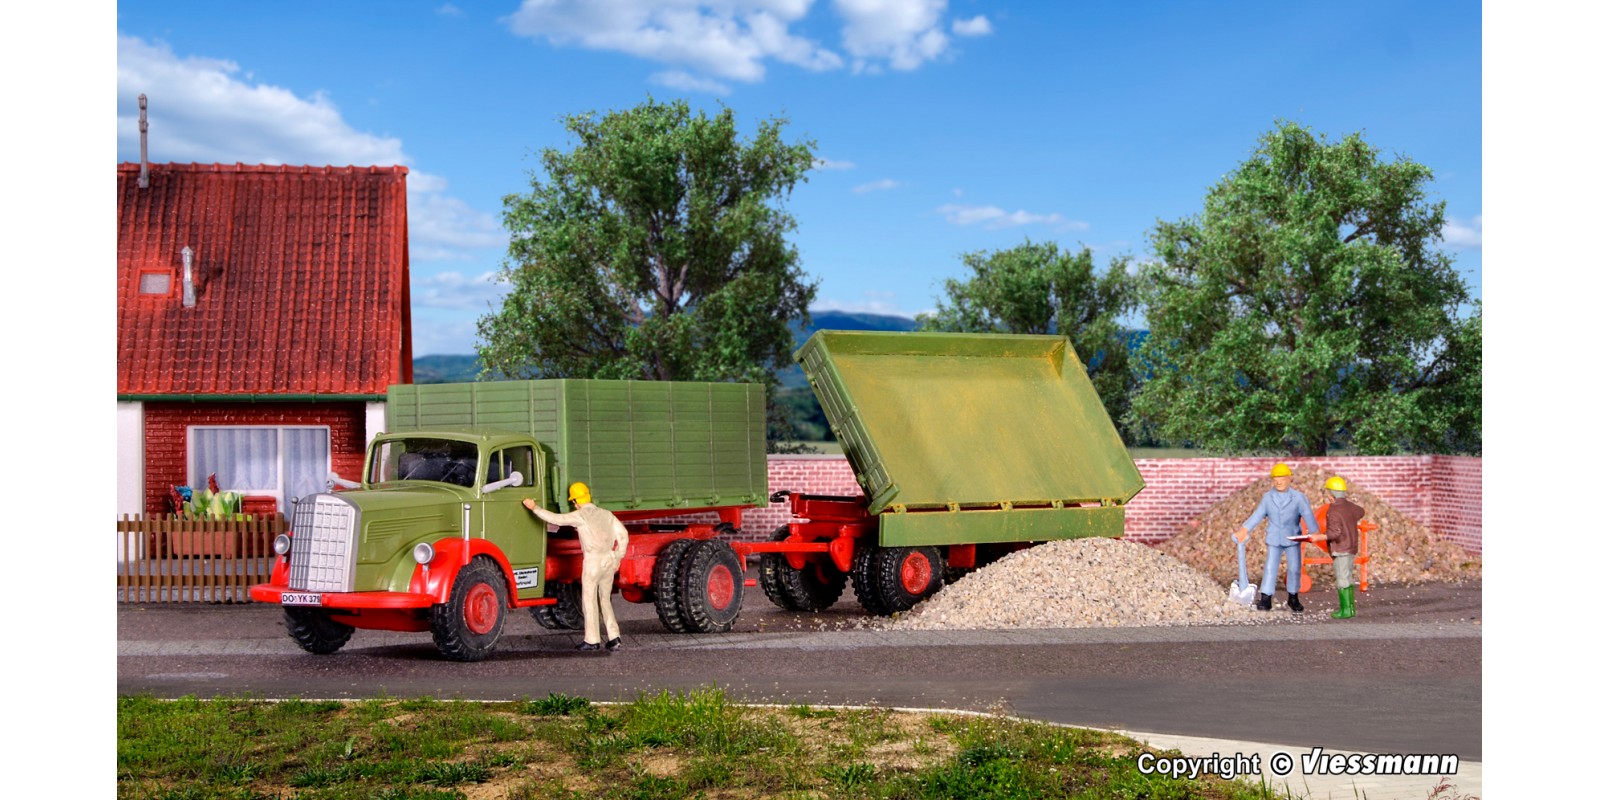 KI14069 H0 MB 6600 tipper with trailer, years of manufacture 1950 - 1954